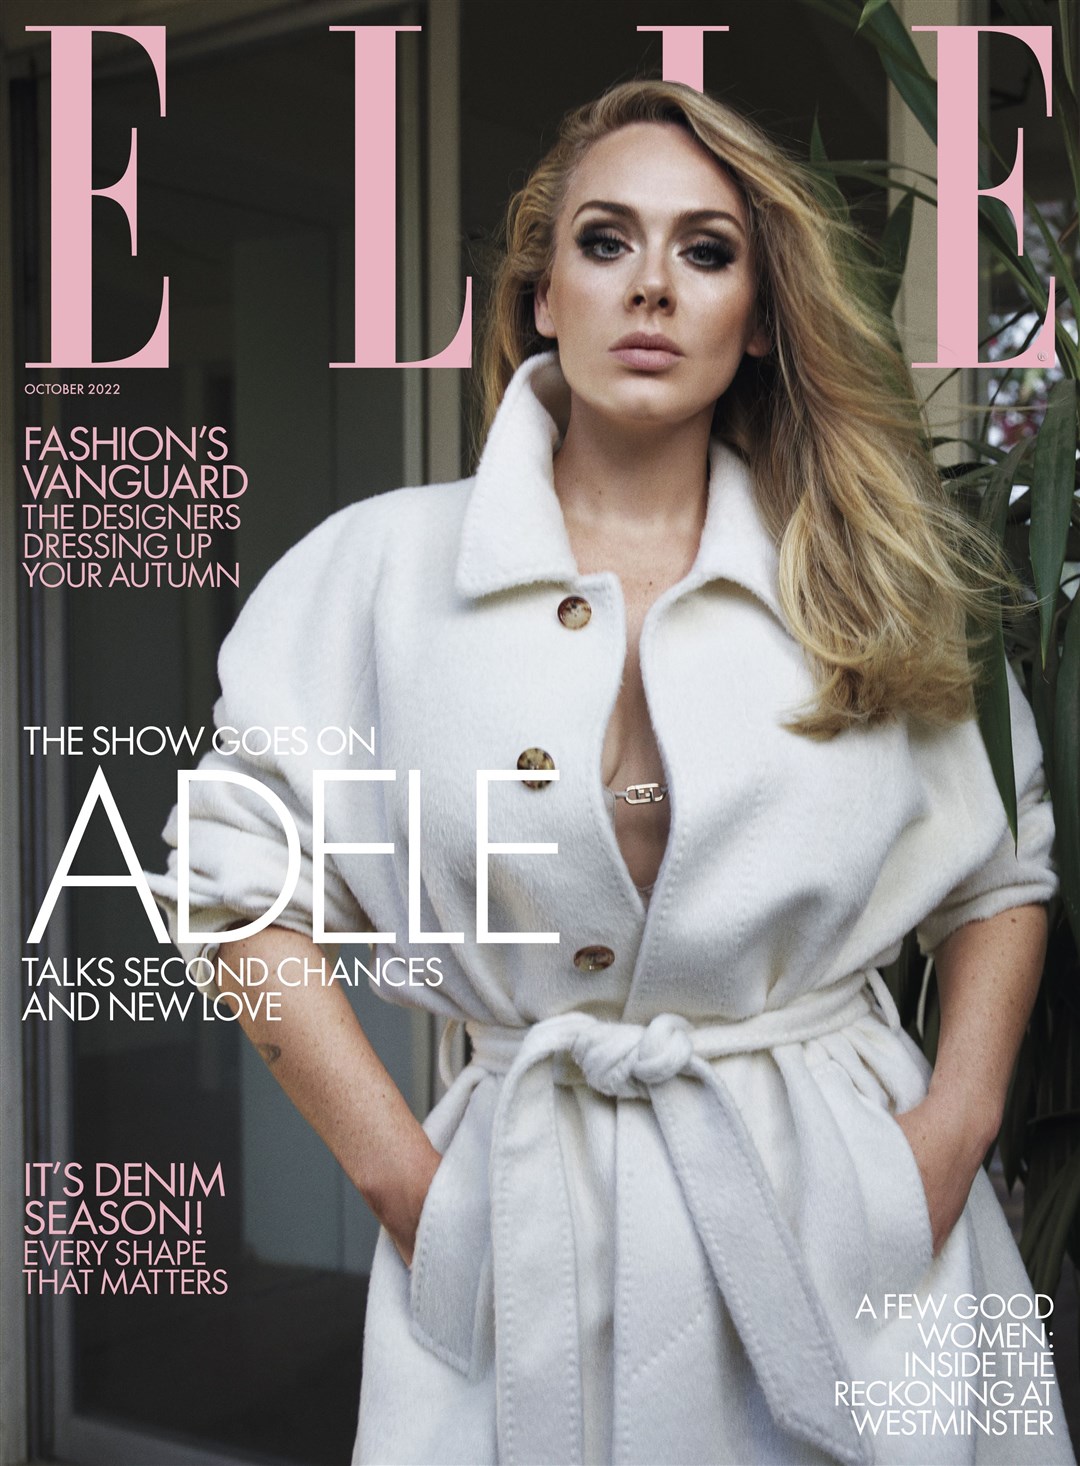 Adele covers the October 2022 issue of Elle UK, Elle US and other global Elle covers across the world (Pictures courtesy of Elle UK/ Mario Sorrenti)